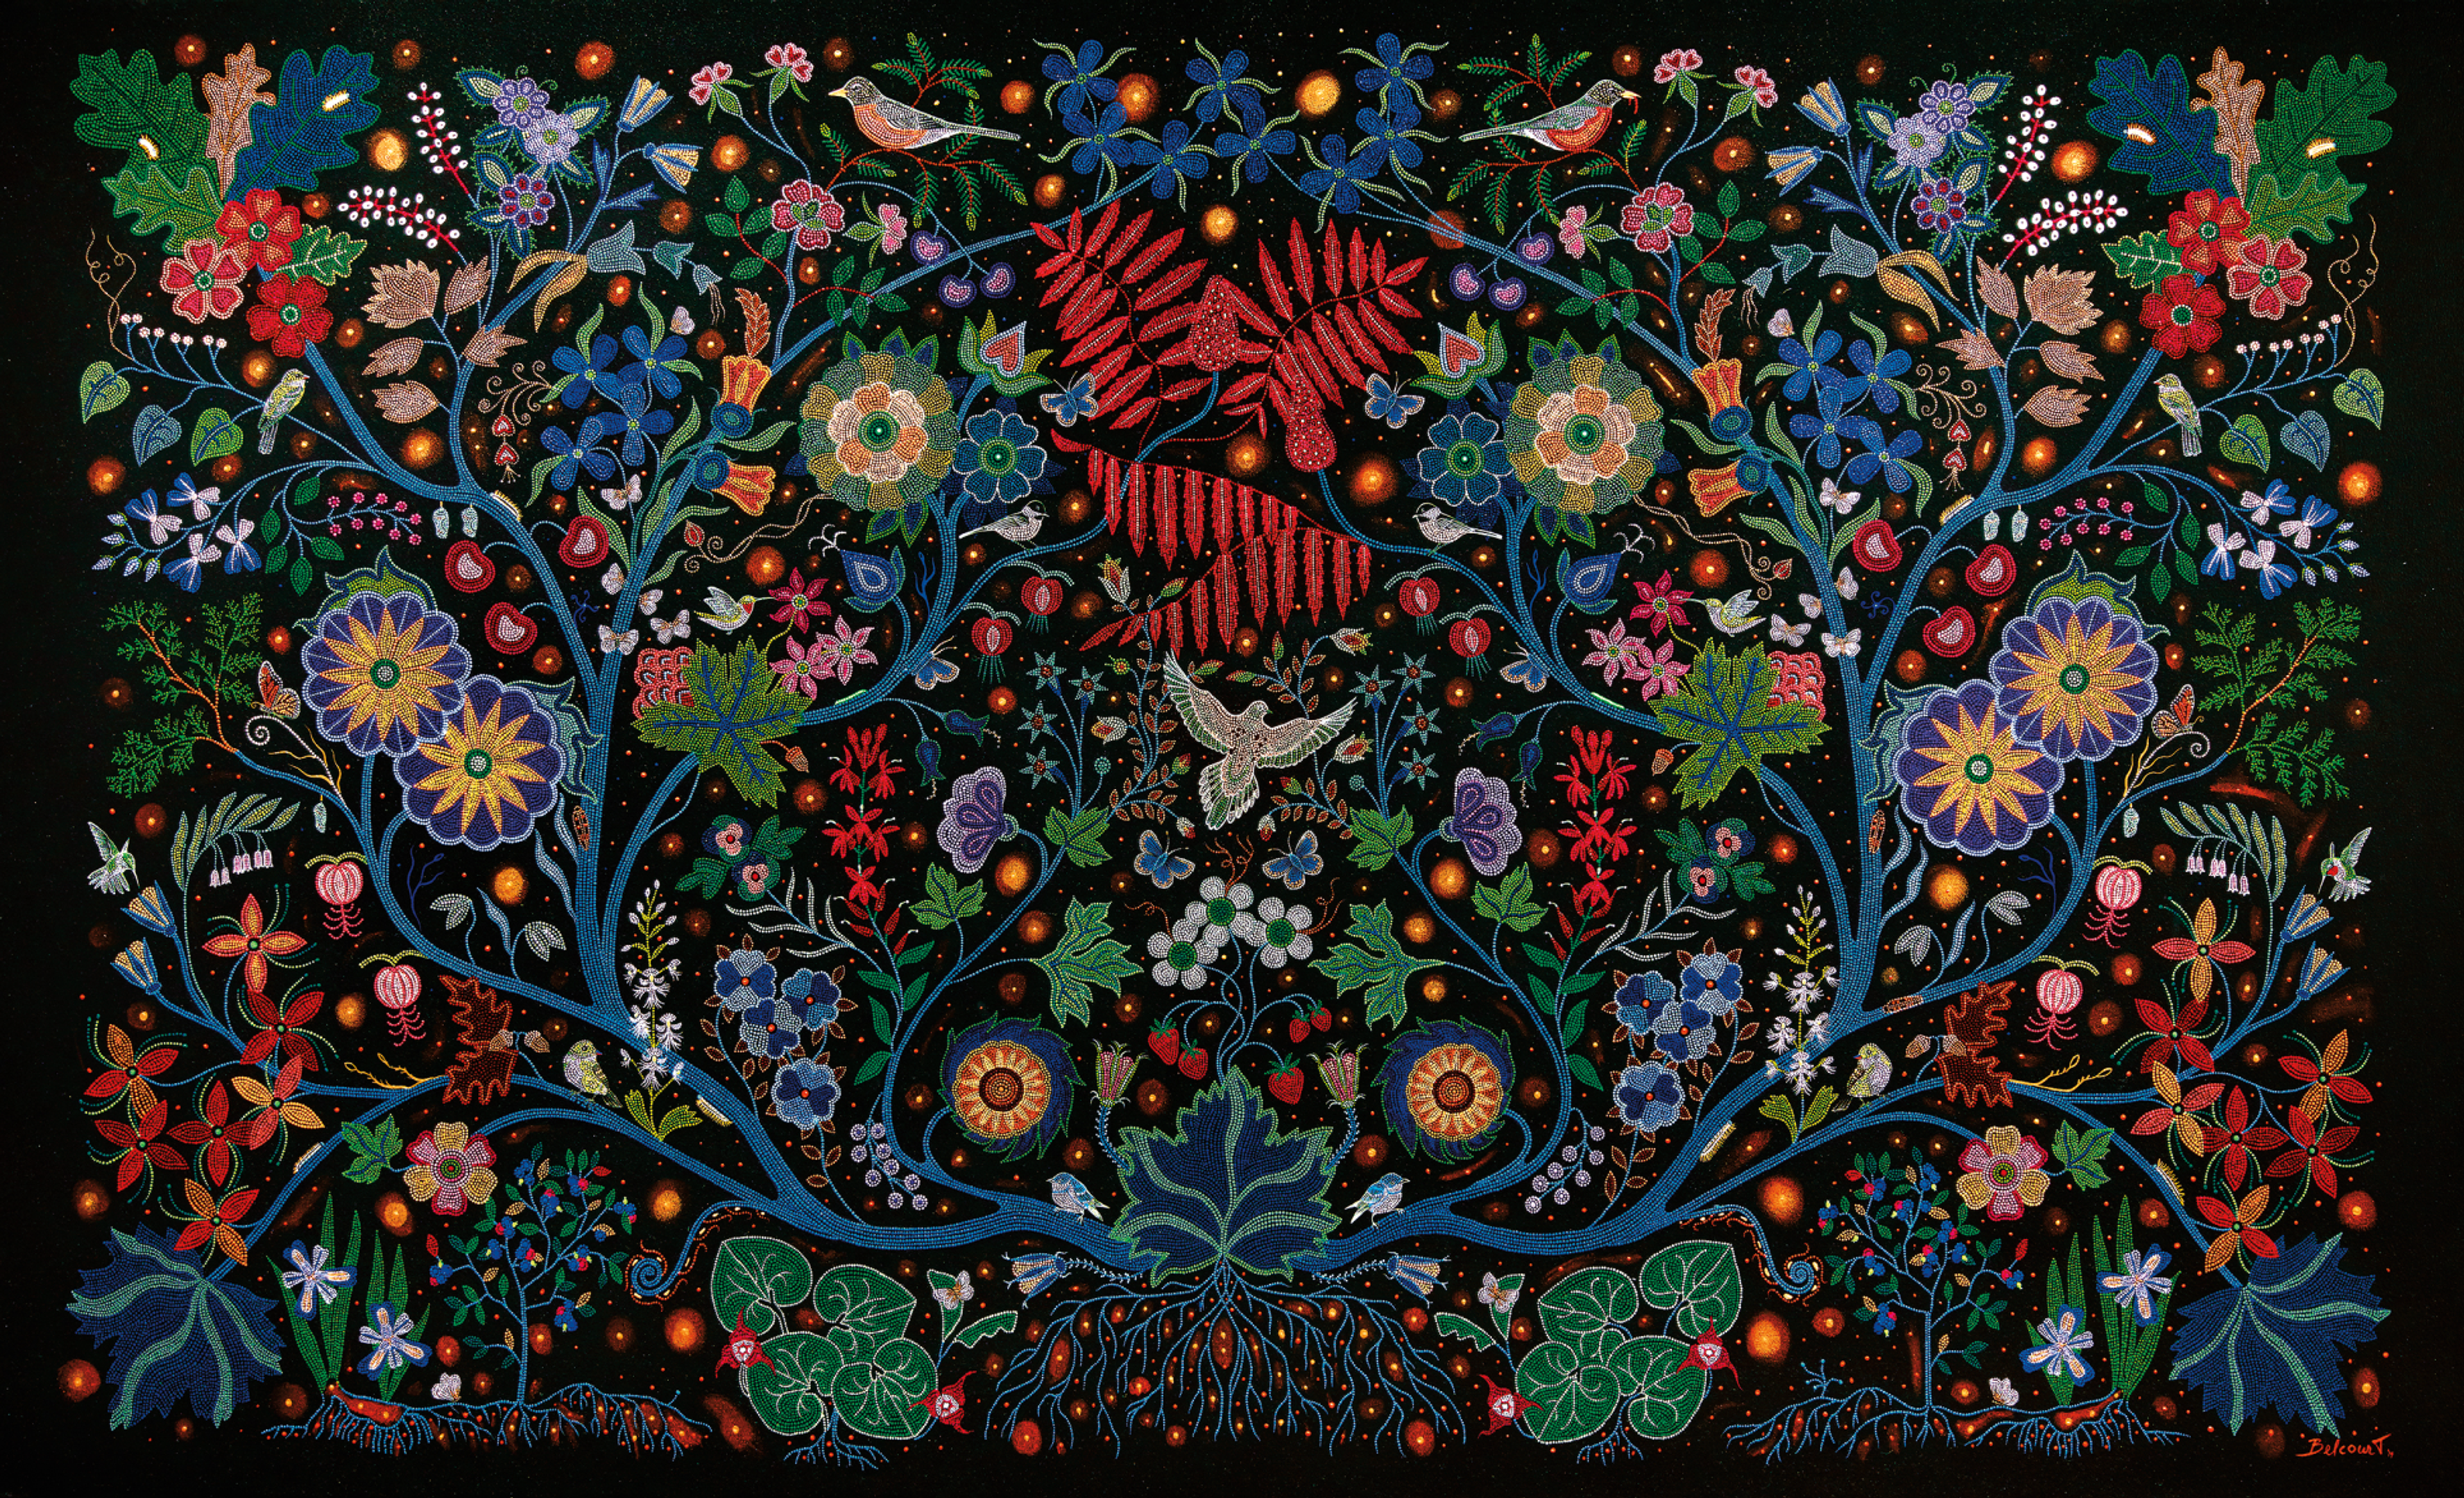 A painting of an interconnected garden with plants, birds, insects and flowers on a black background